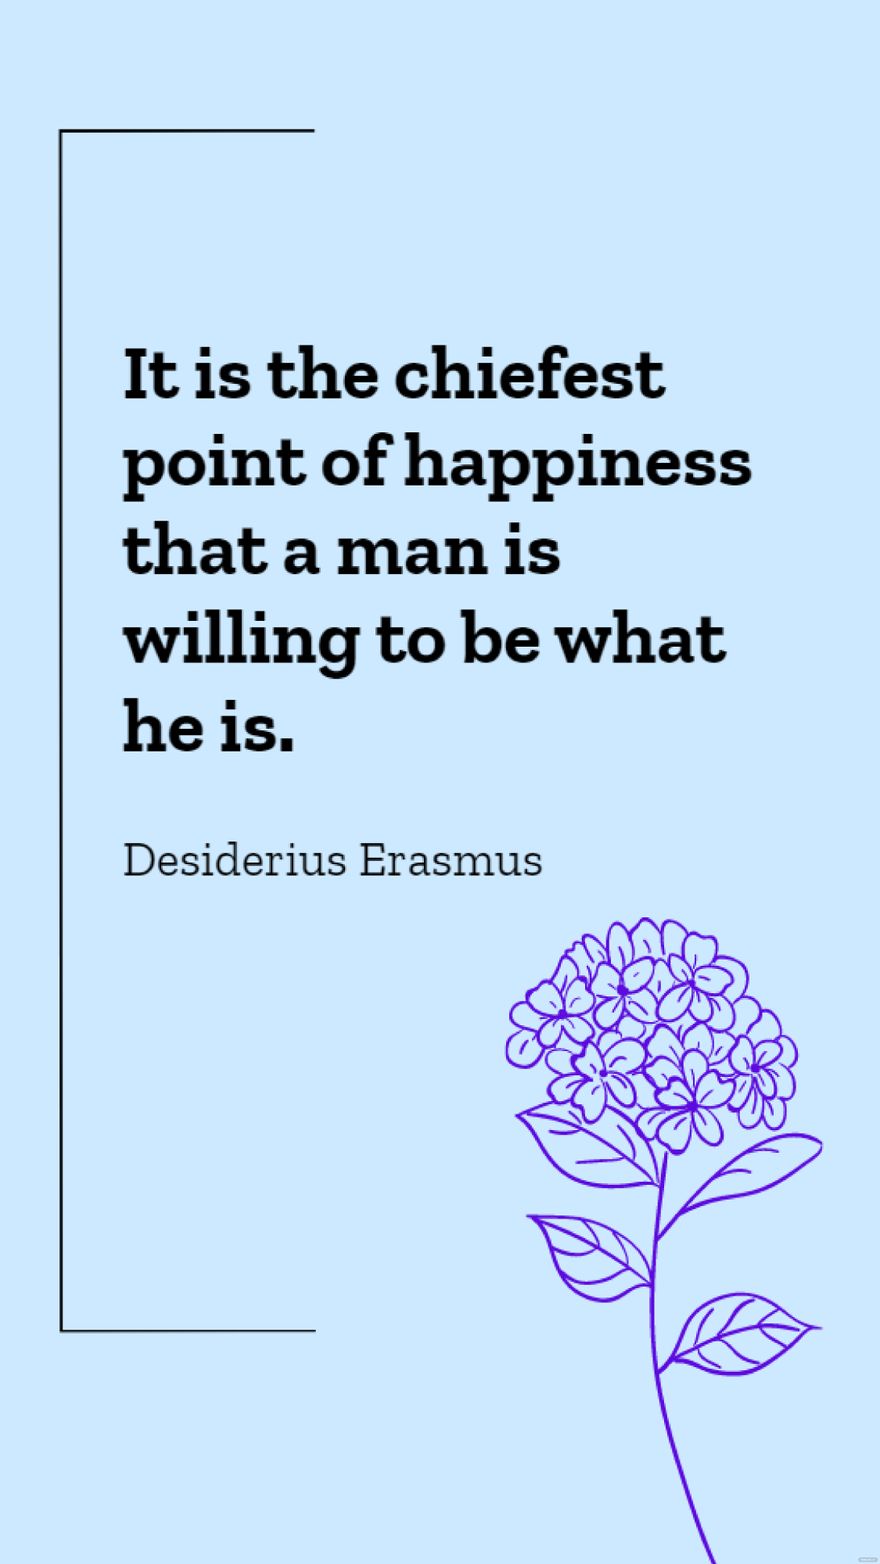 Desiderius Erasmus - It is the chiefest point of happiness that a man is willing to be what he is.